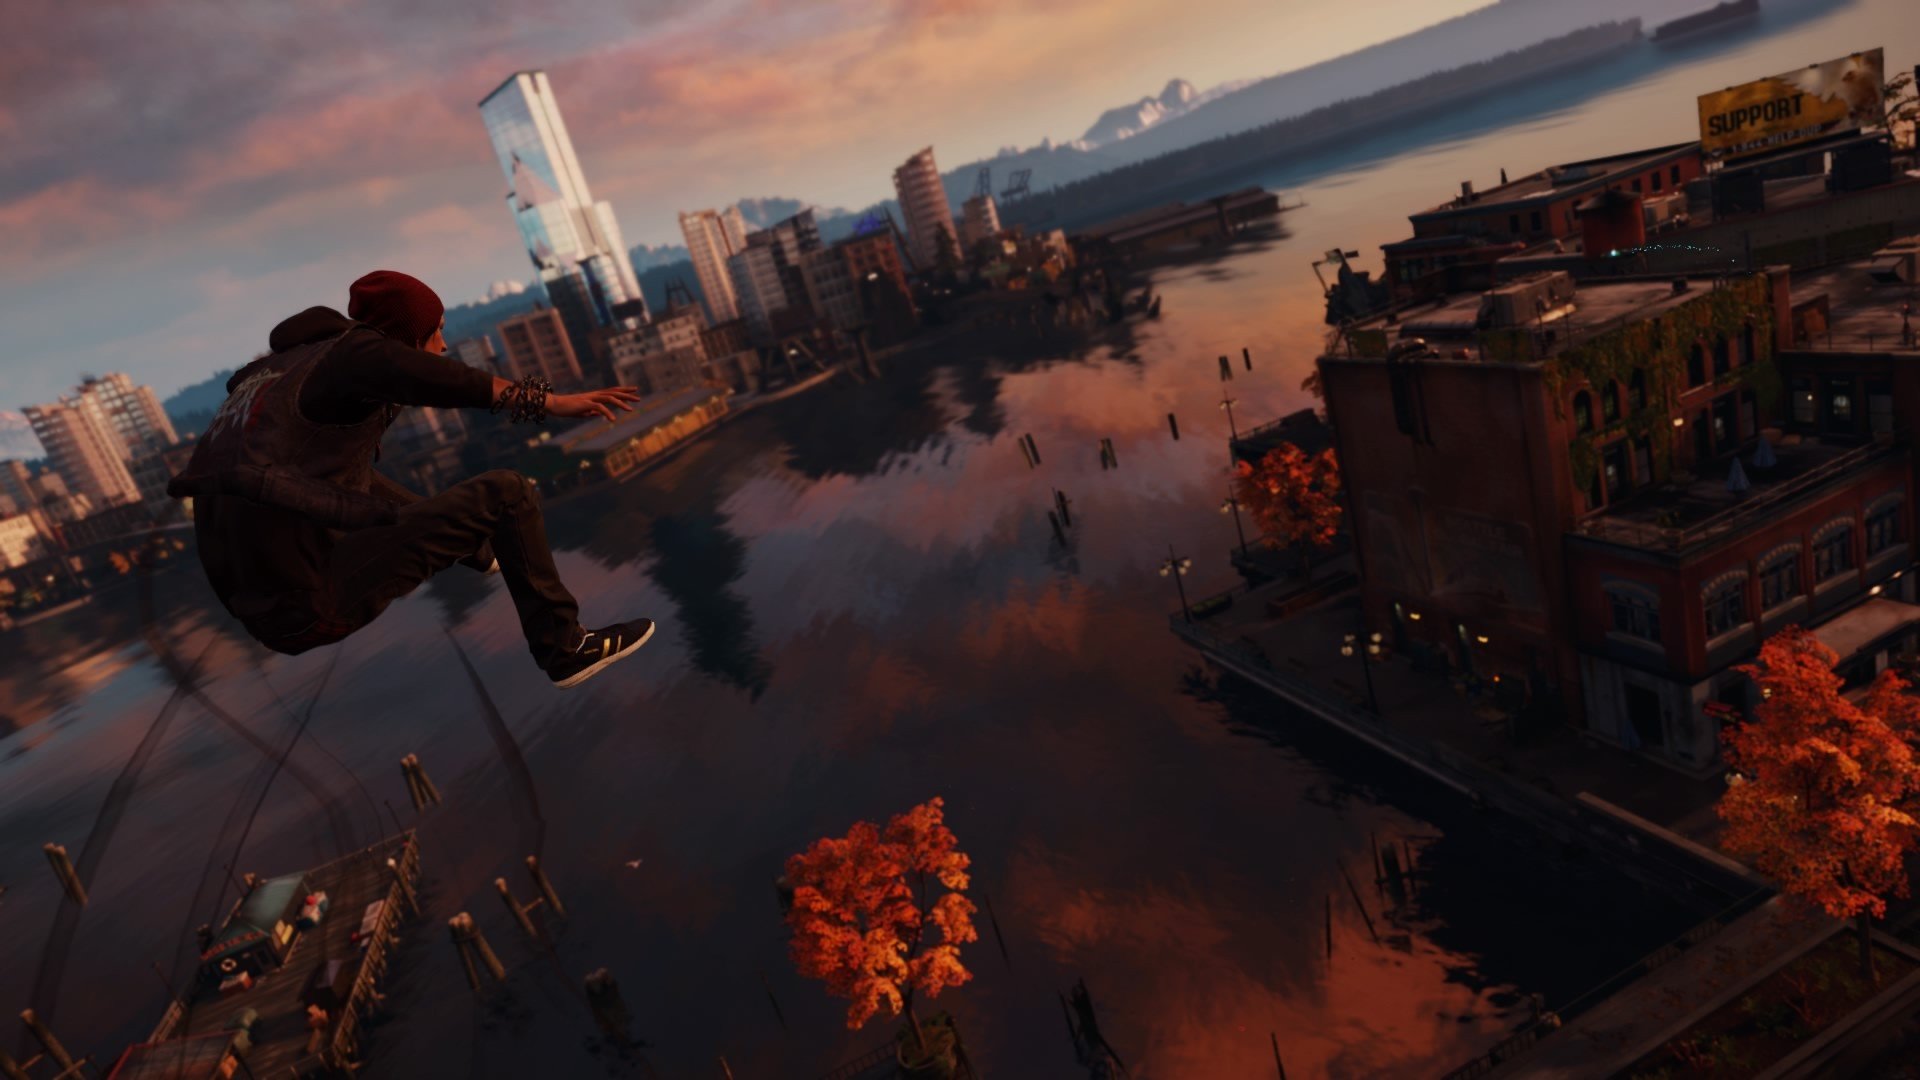 Wallpaper x px infamous second son video games x